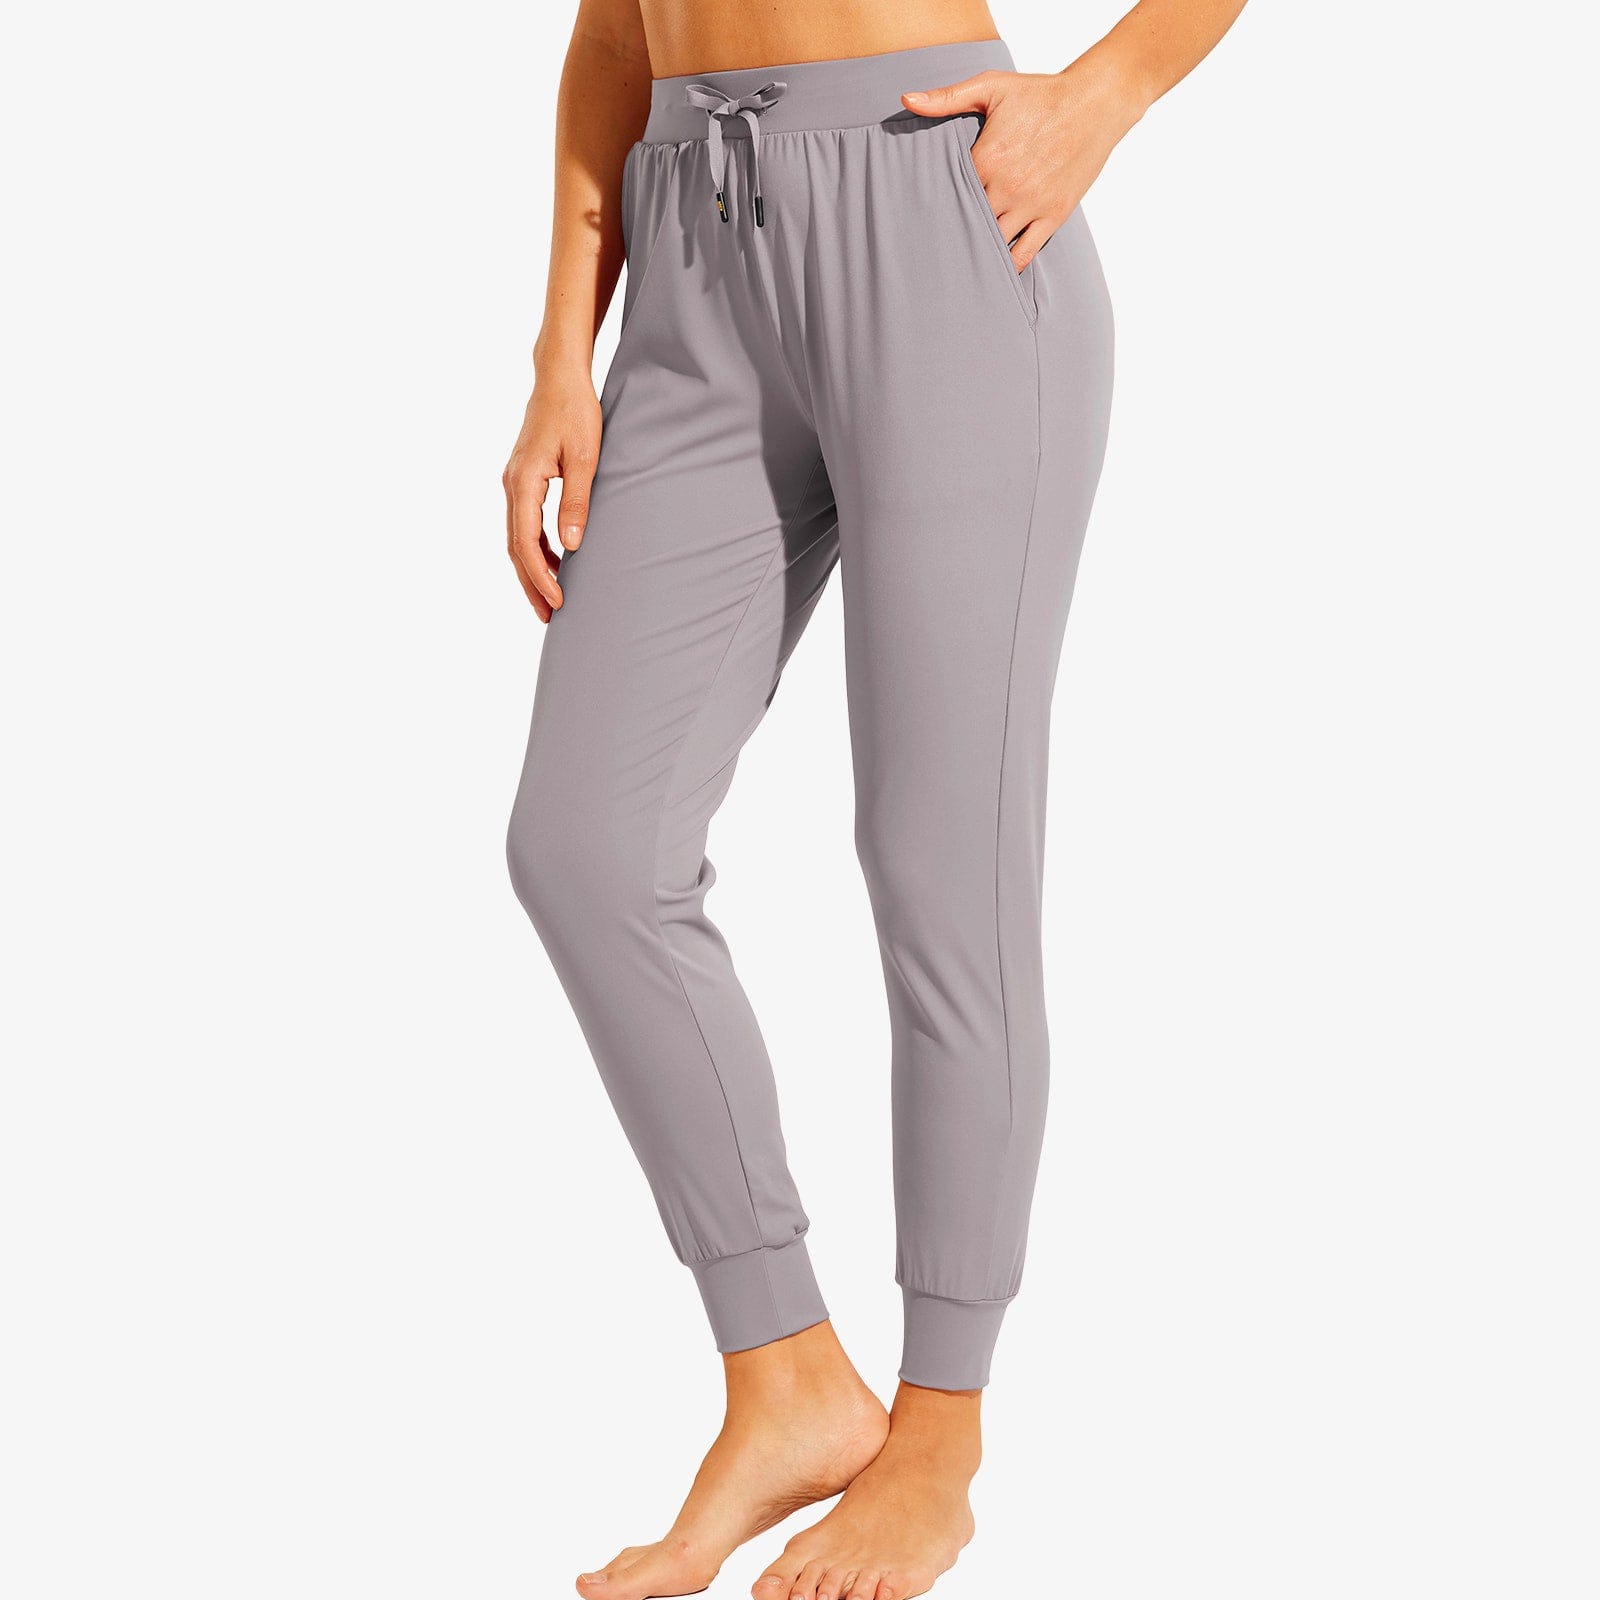 Women's Joggers with Pockets Lightweight Athletic Sweatpants - Light Grey /  XS